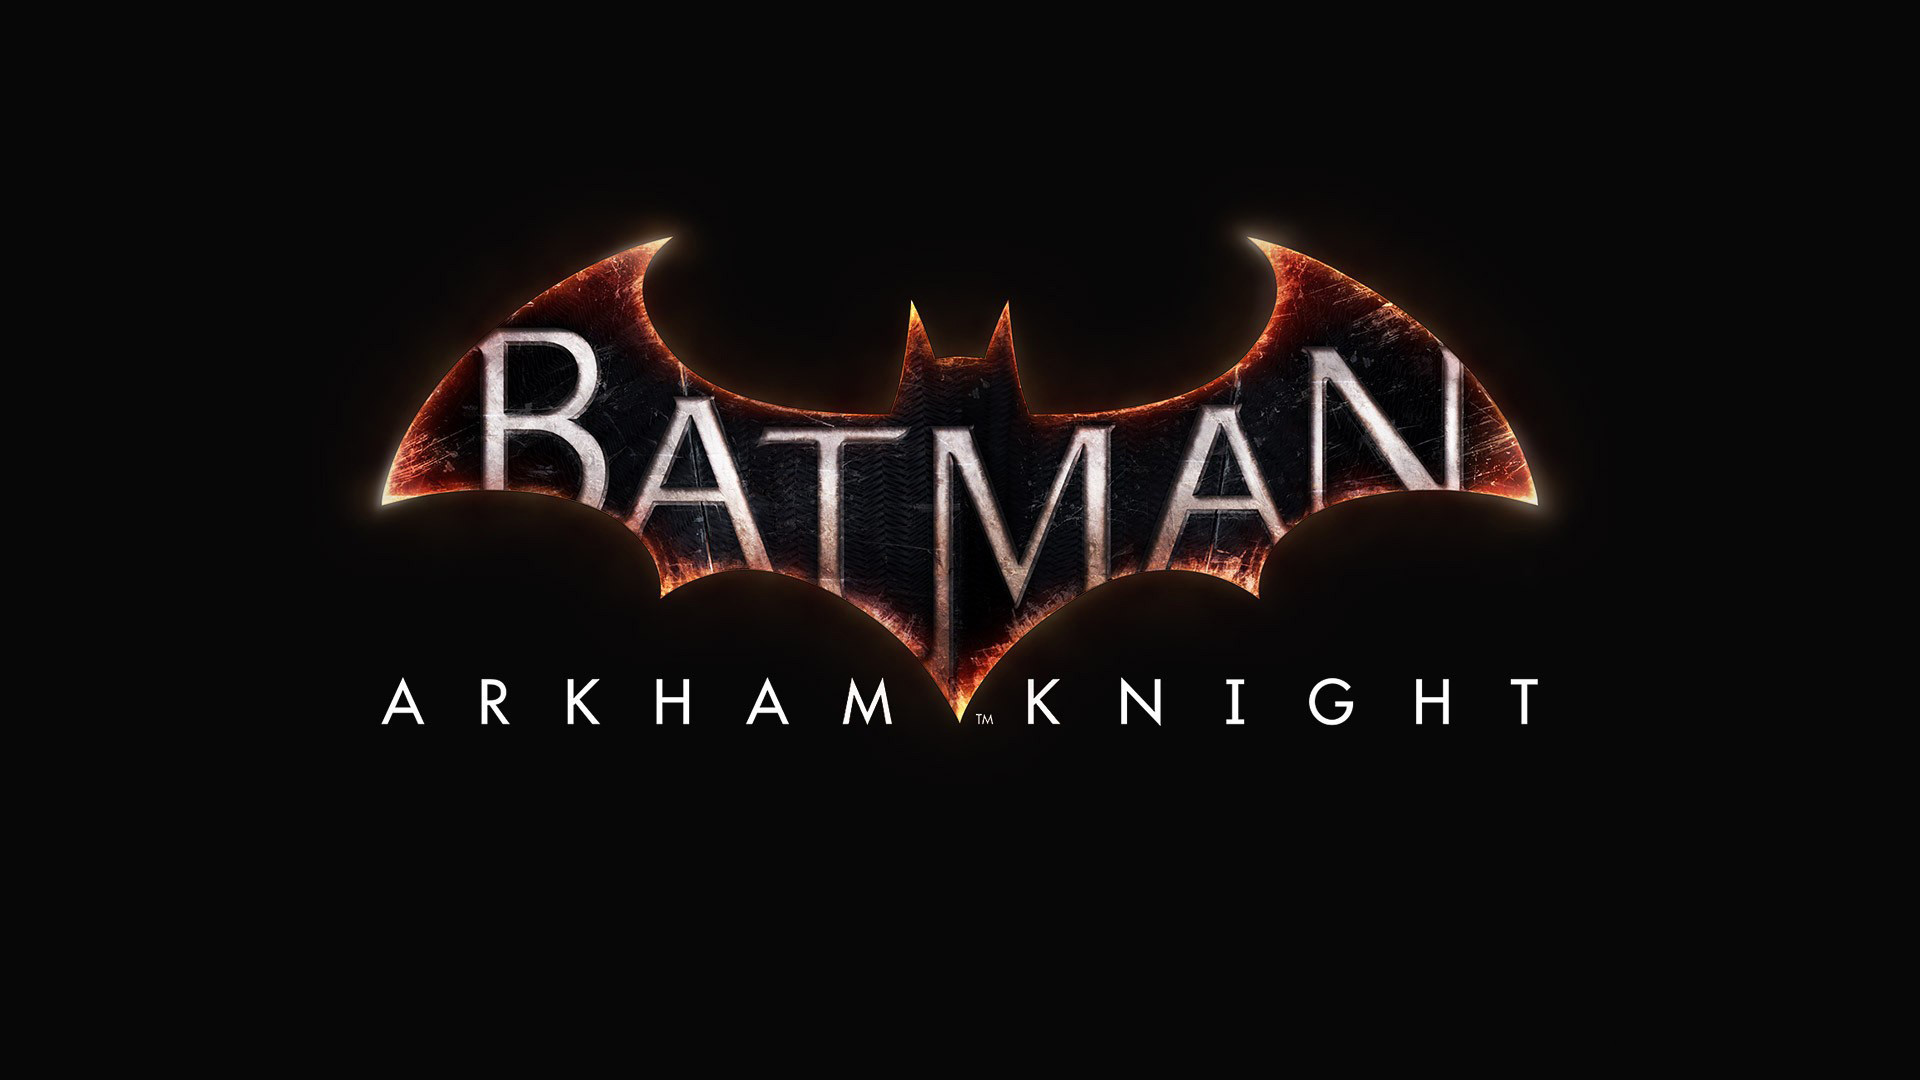 1920x1080 Batman: Arkham Knight ESRB Rating Thoughts and Analysis